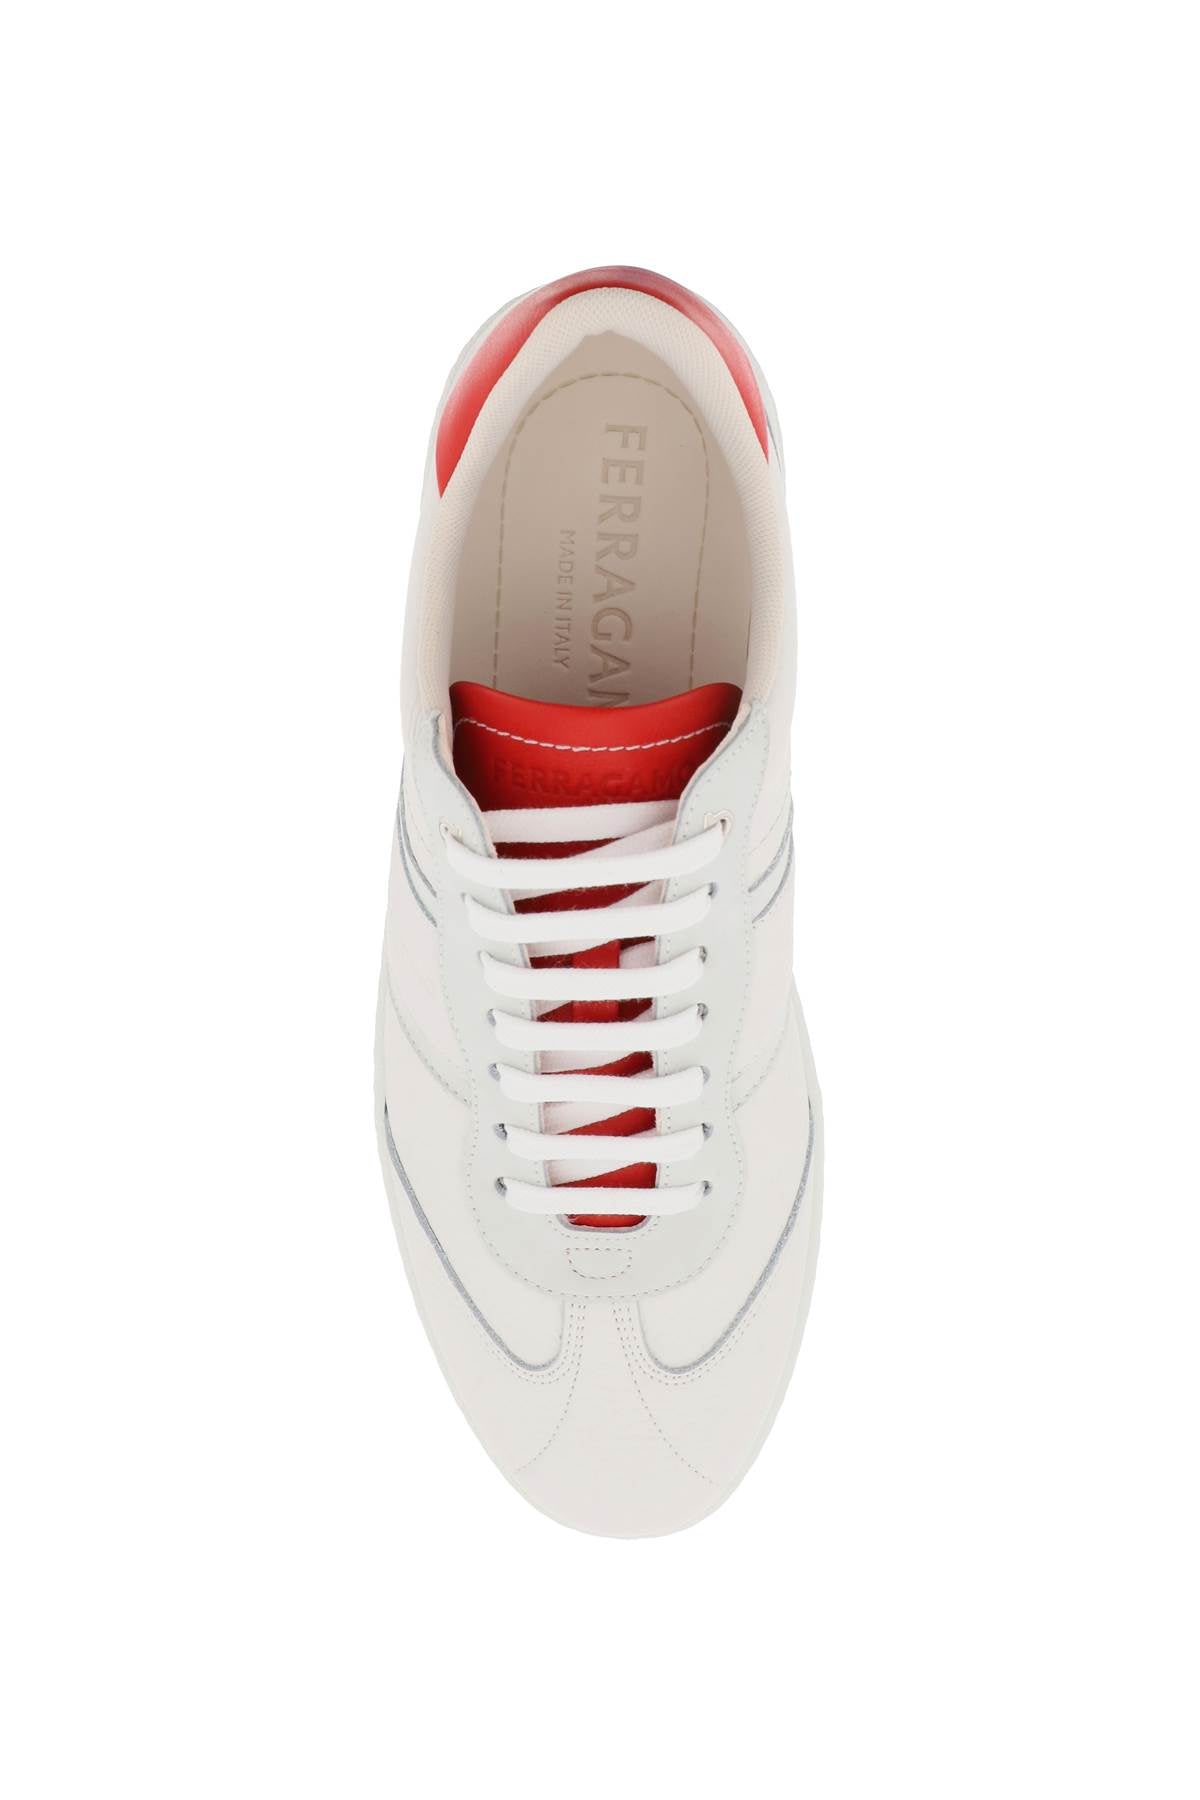 FERRAGAMO Men's Grained Leather Sneakers with Suede Inserts and Debossed Logo